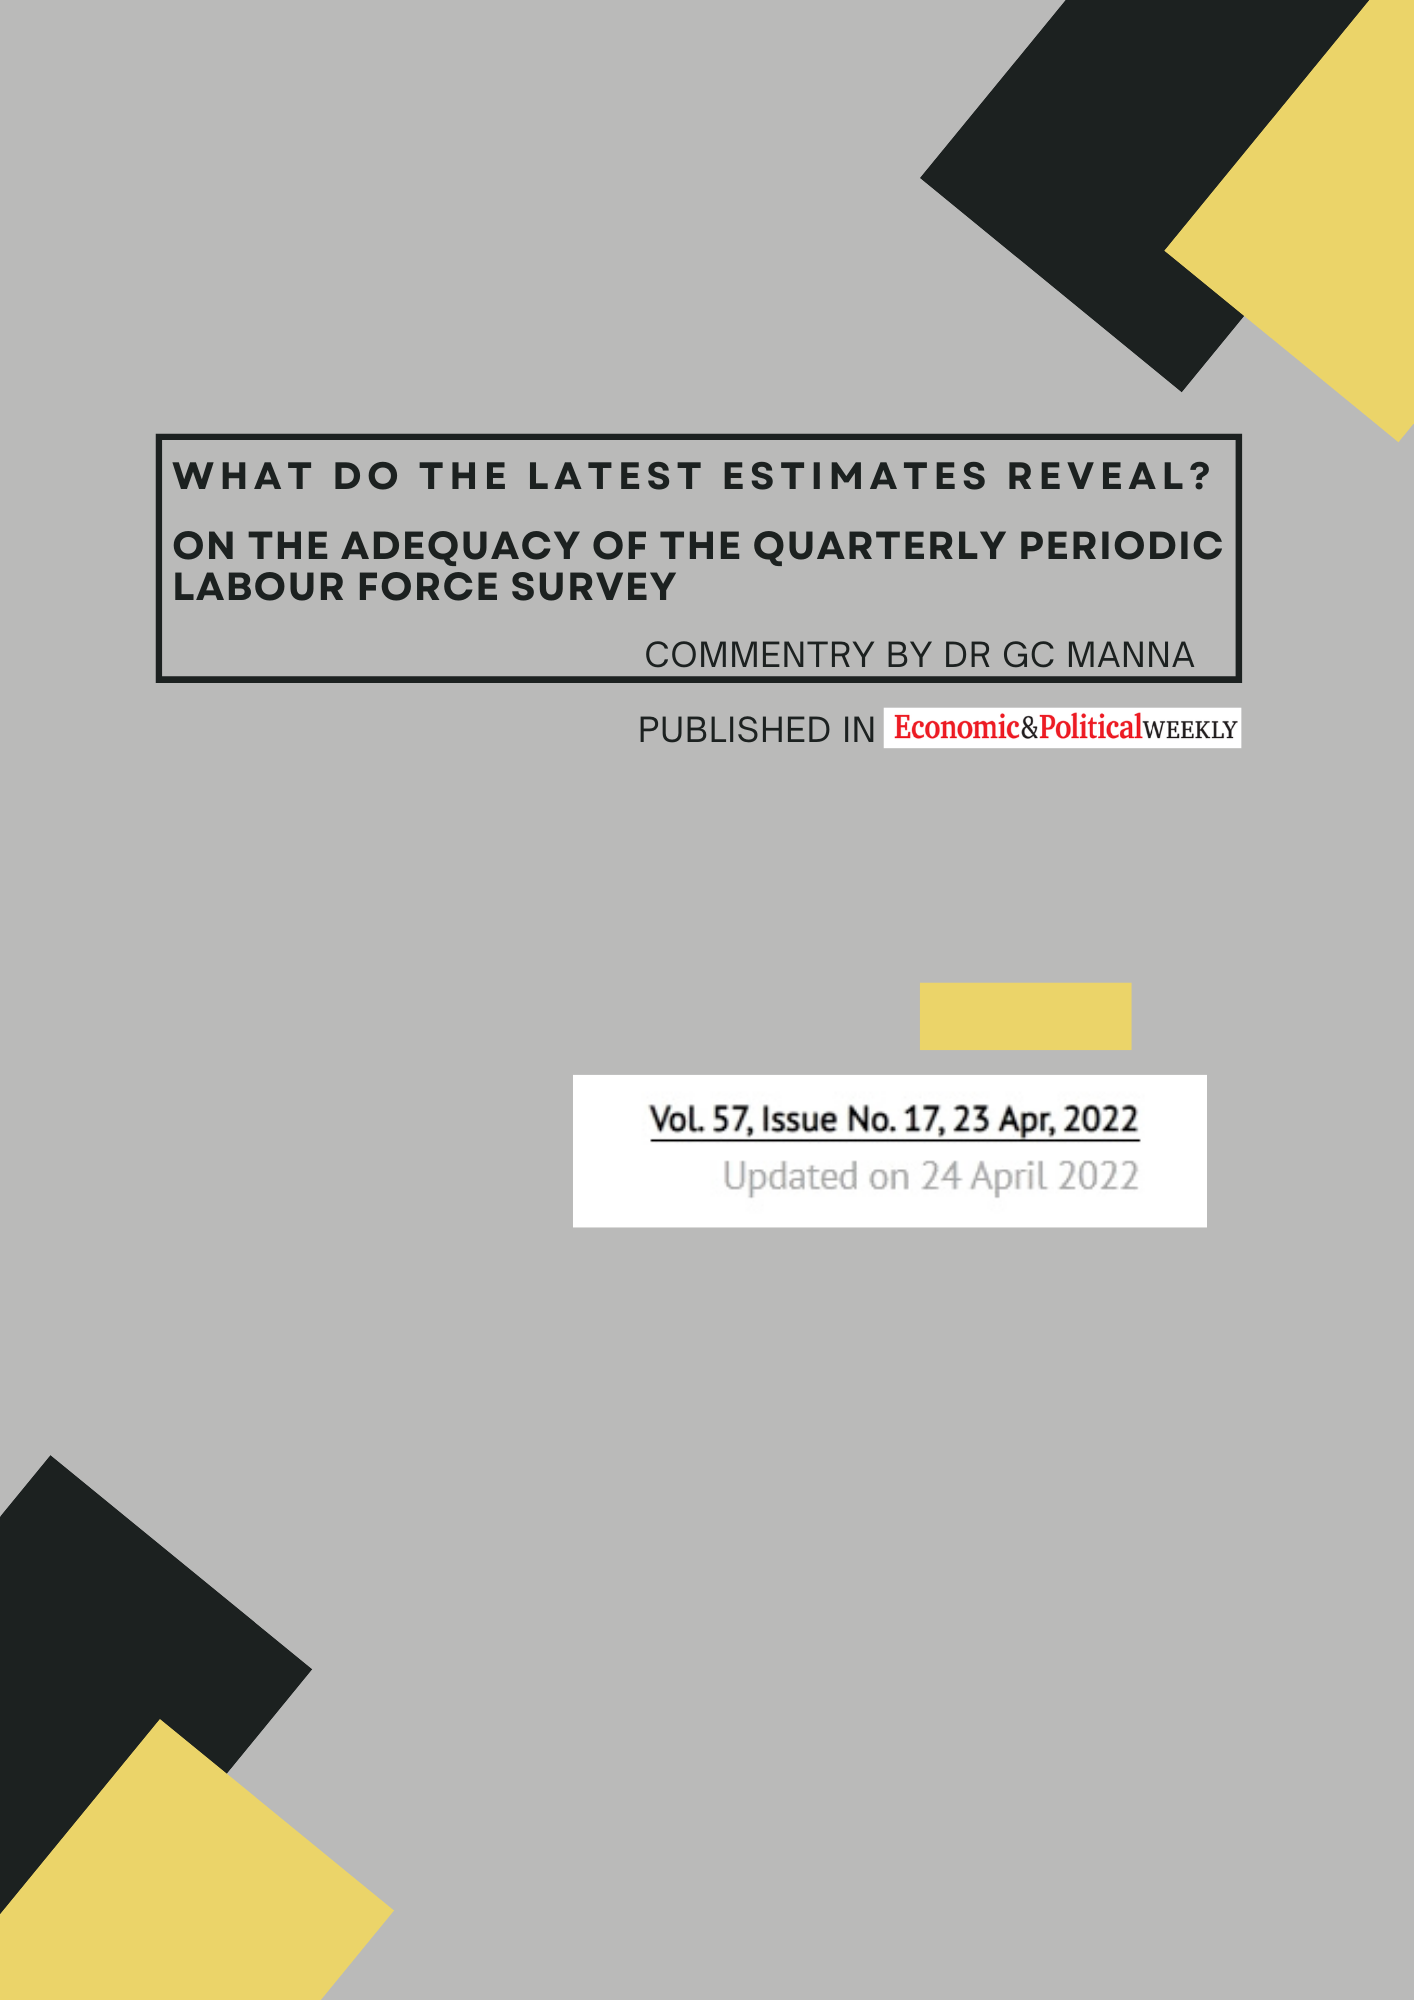 “What Do the Latest Estimates Reveal?” | On the Adequacy of the Quarterly Periodic Labour Force Survey